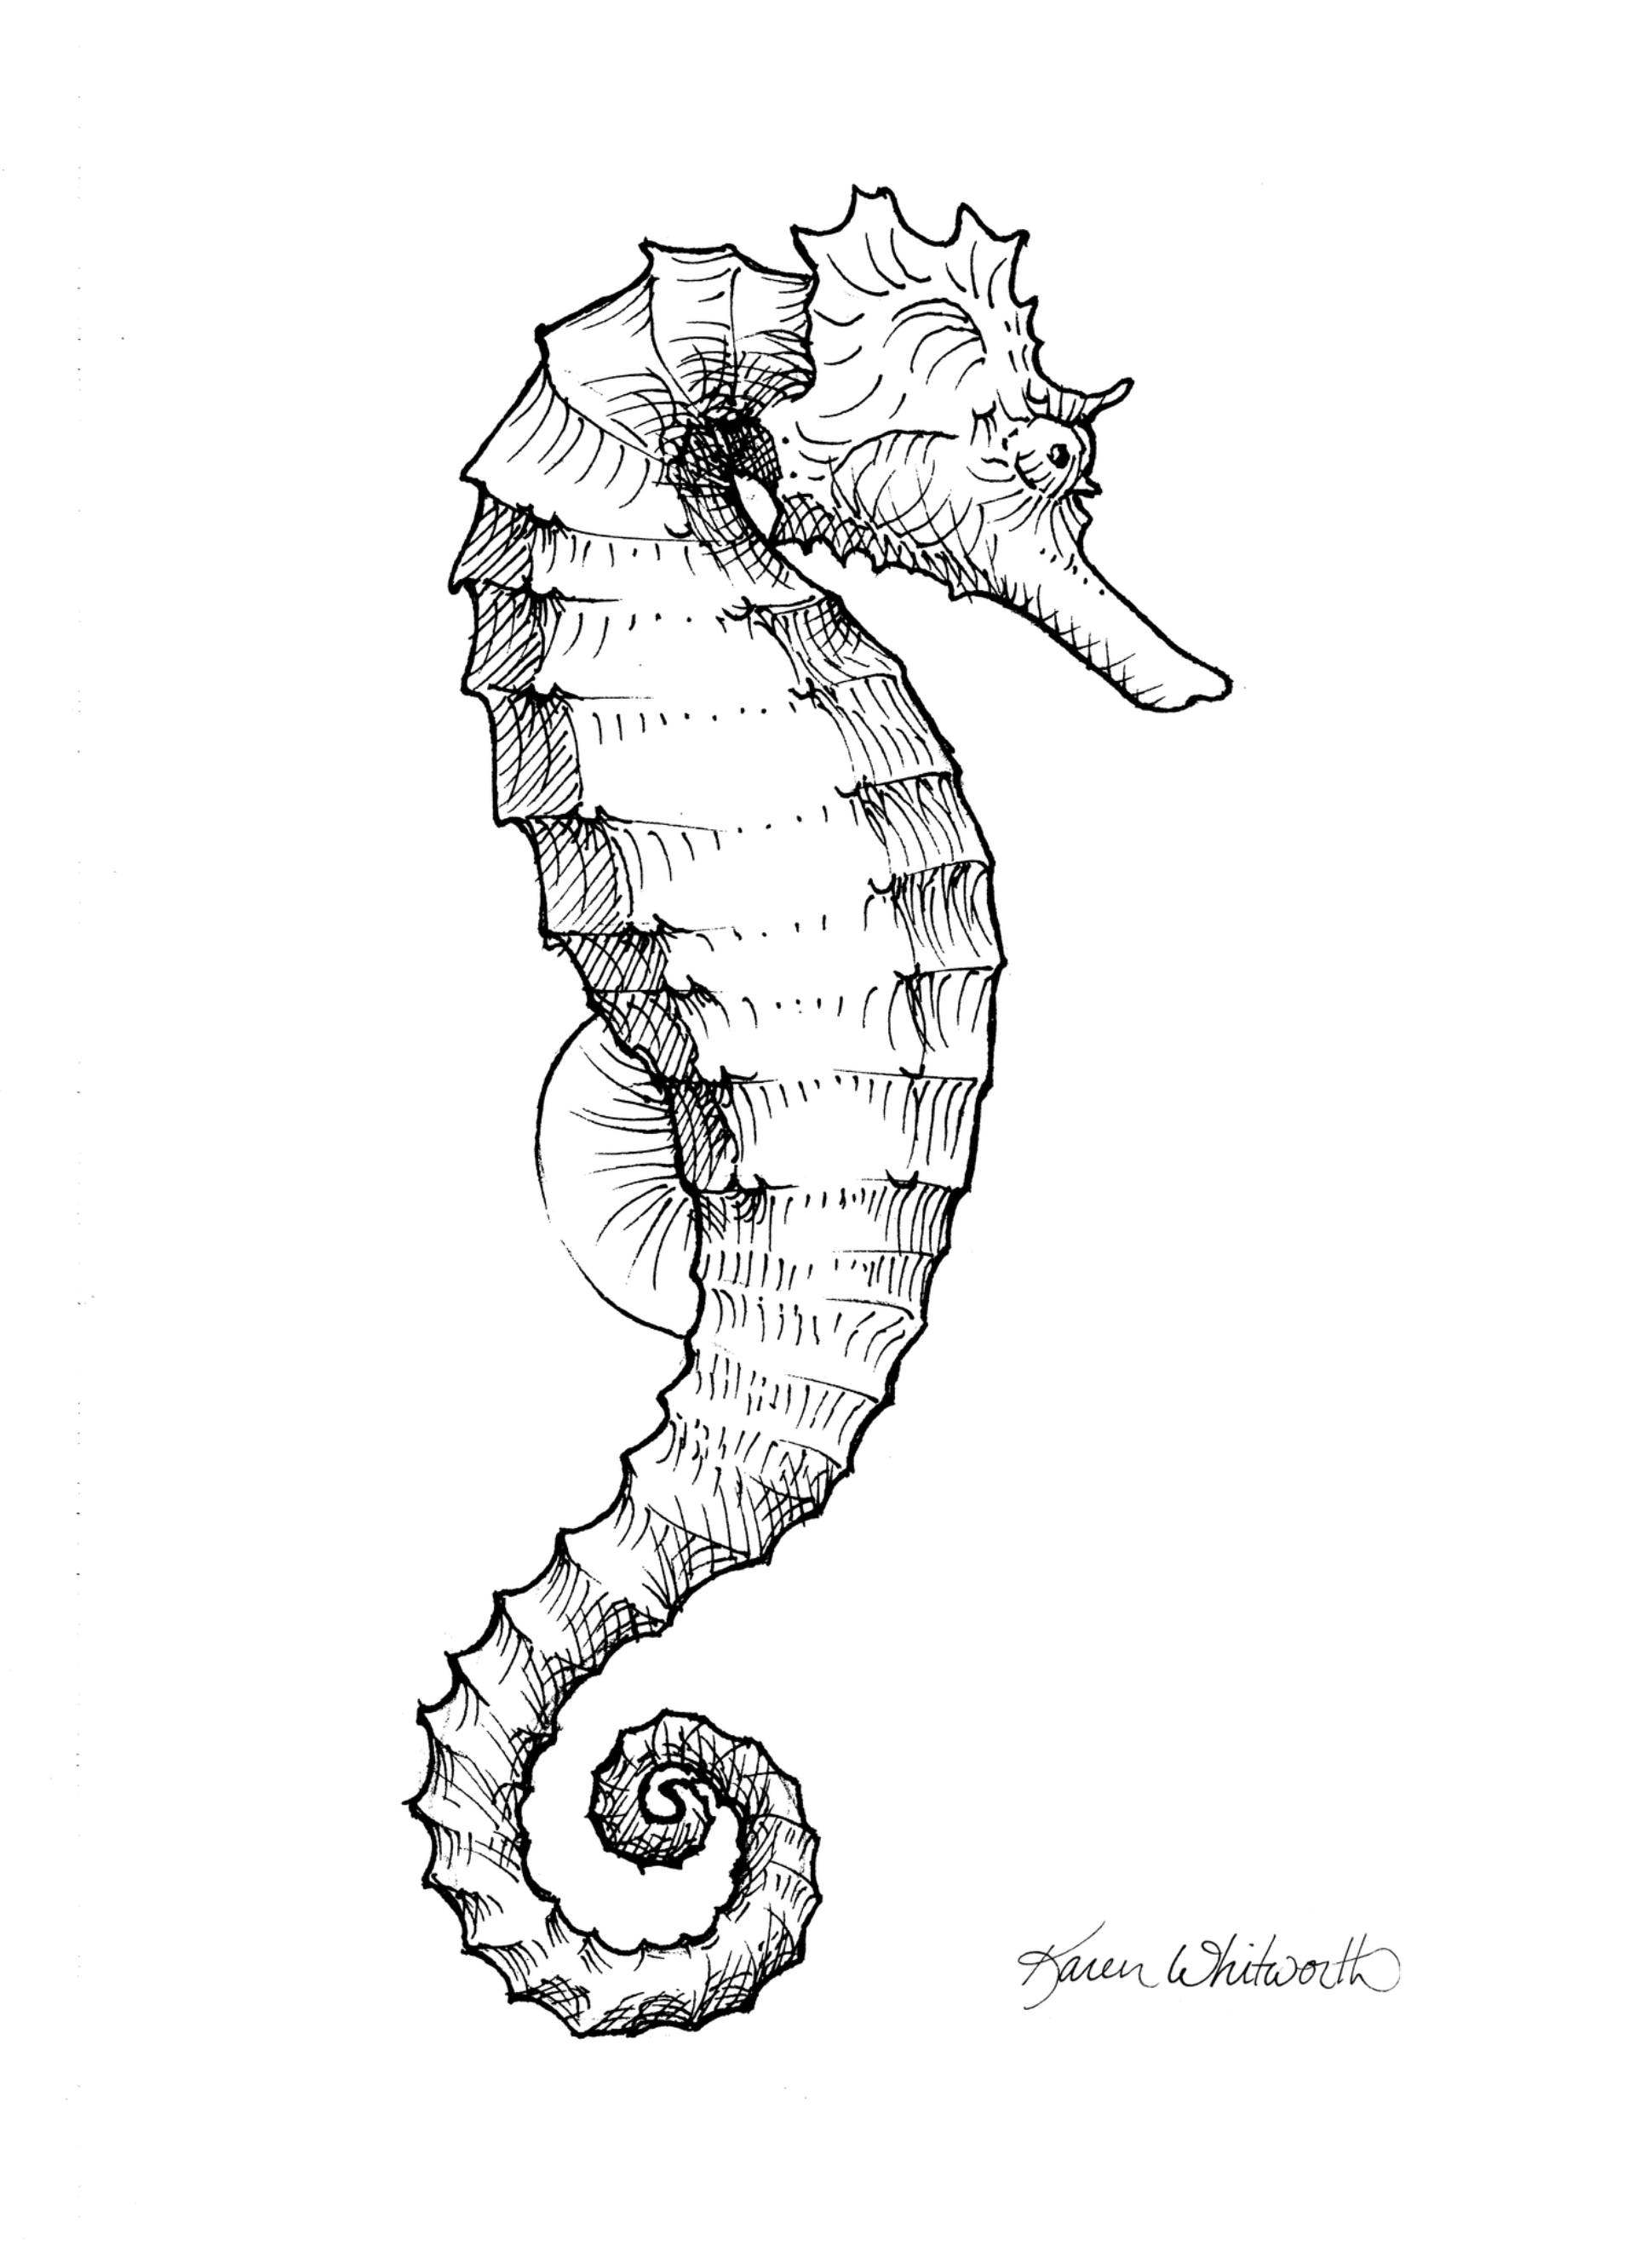 Saatchi Art: Seahorse - Nautical Black And White Drawing Drawing by ...